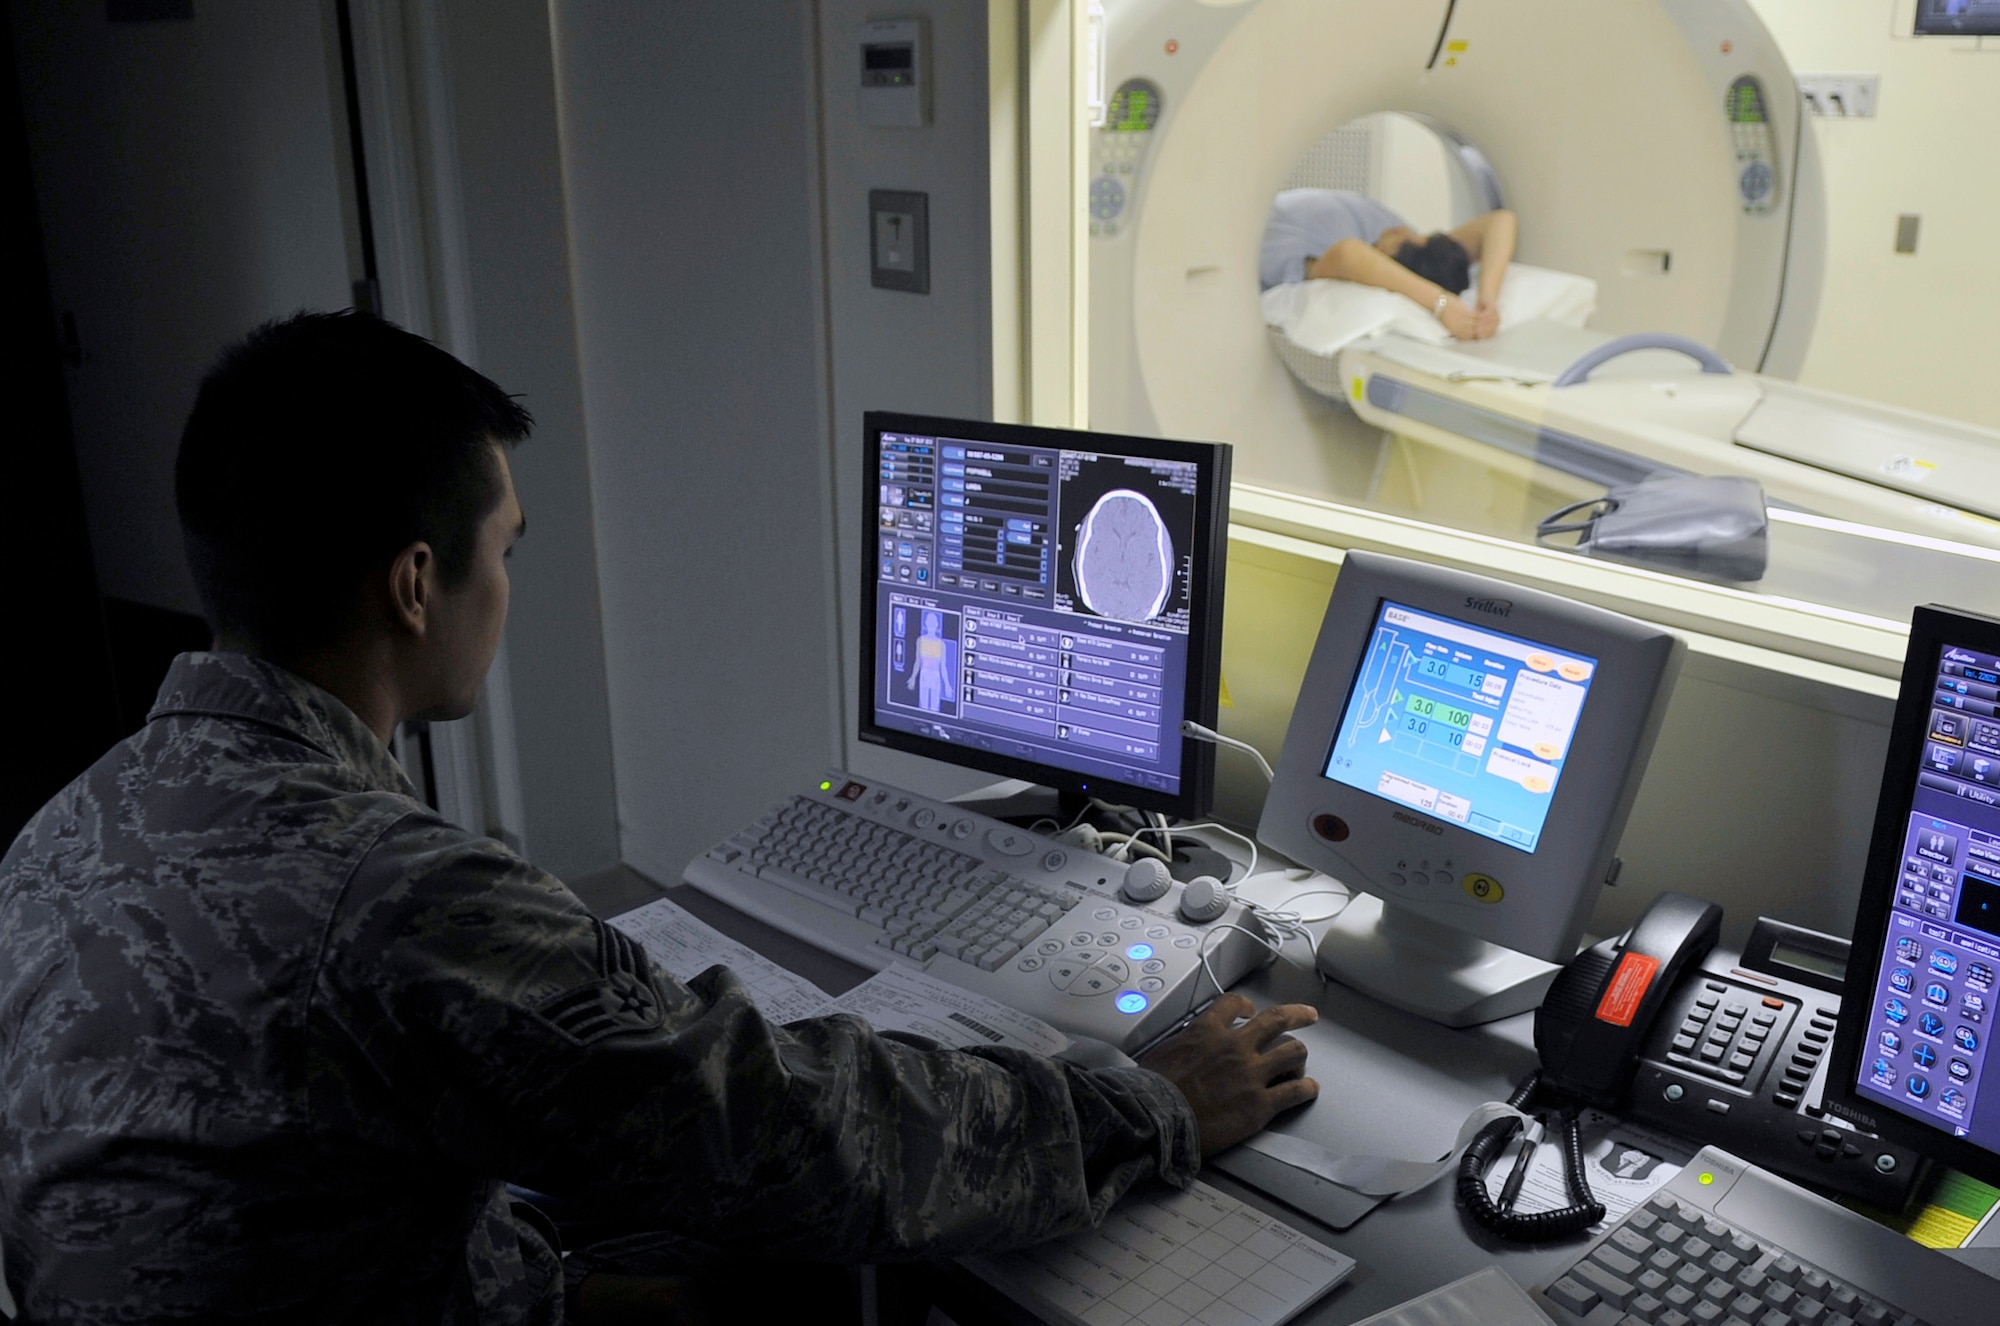 U.S. Air Force Senior Airman James Lord, 35th Surgical Operations Squadron diagnostic imaging technologist, starts a CT scan at Misawa Air Base, Japan, Aug. 27, 2013. With this monitor, technologists can start and control a scan without being in the same room as the patient or machine. (U.S. Air Force photo by Airman 1st Class Zachary Kee)